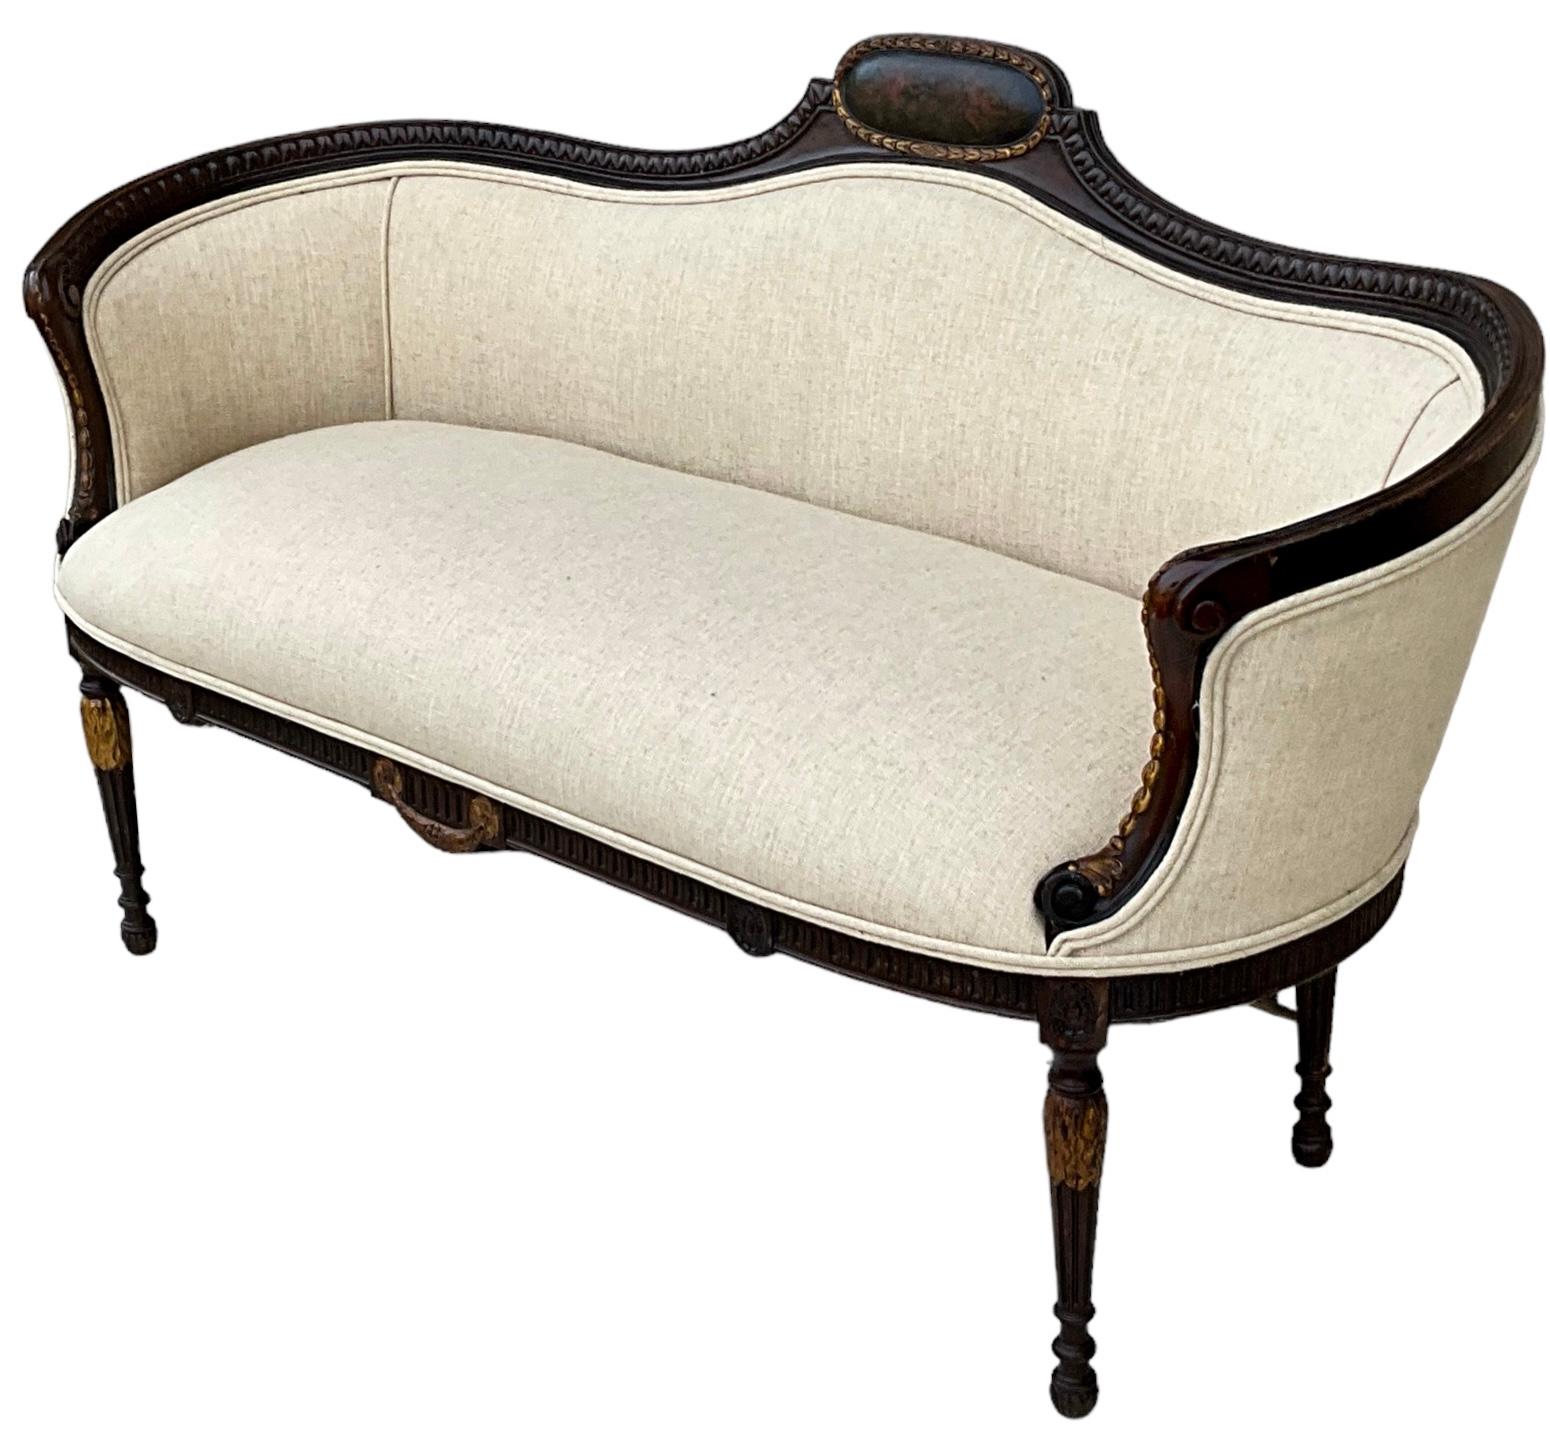 Antique English Edwardian Painted And Carved Mahogany Settee In Oatmeal Linen For Sale 1